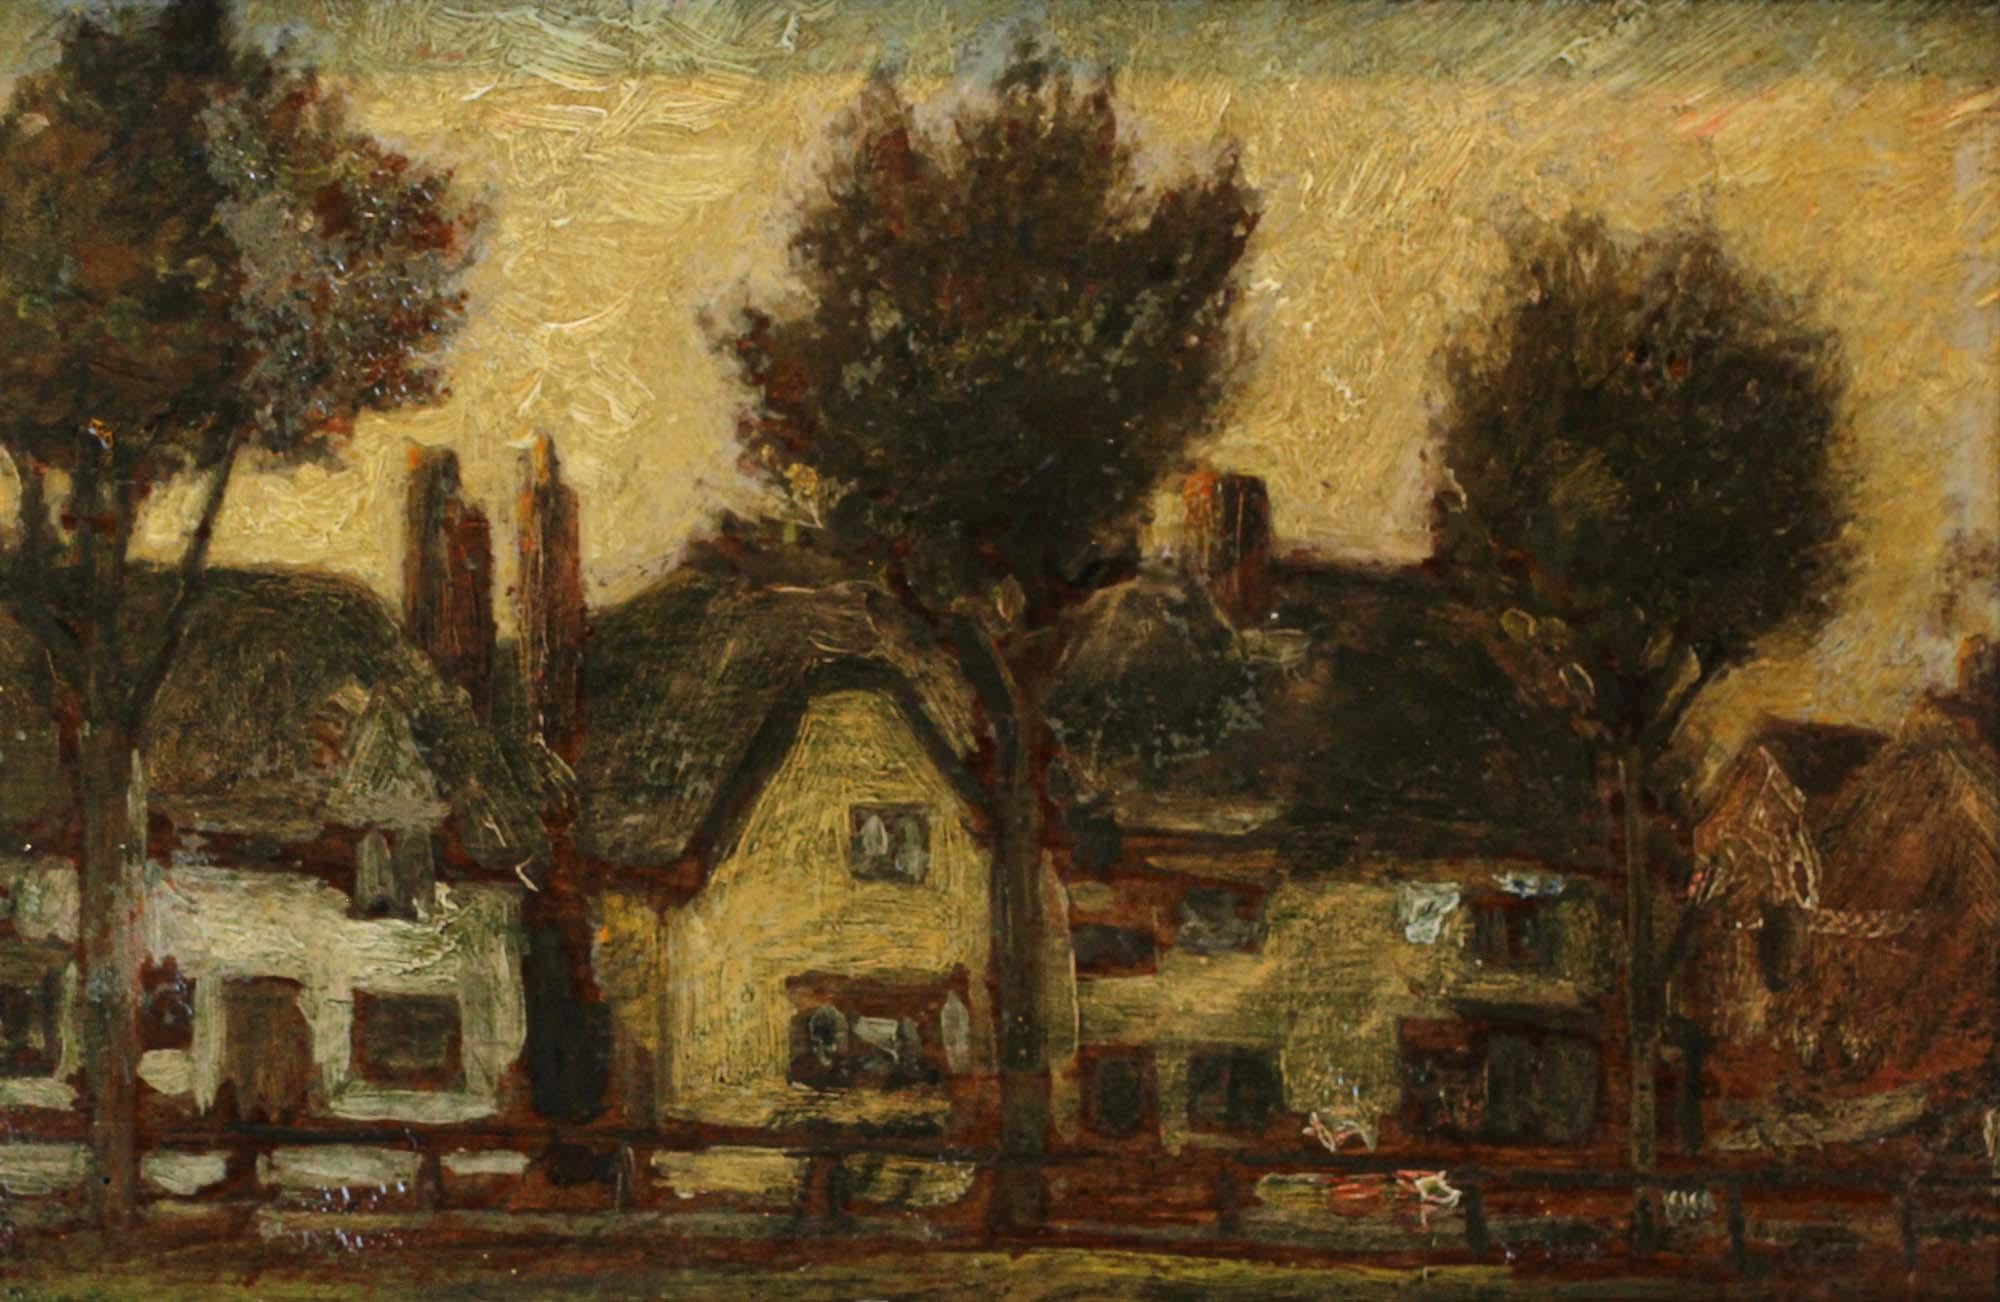 Wood 20th Century Unknown Artist Oil on Panel Painting, Landscape